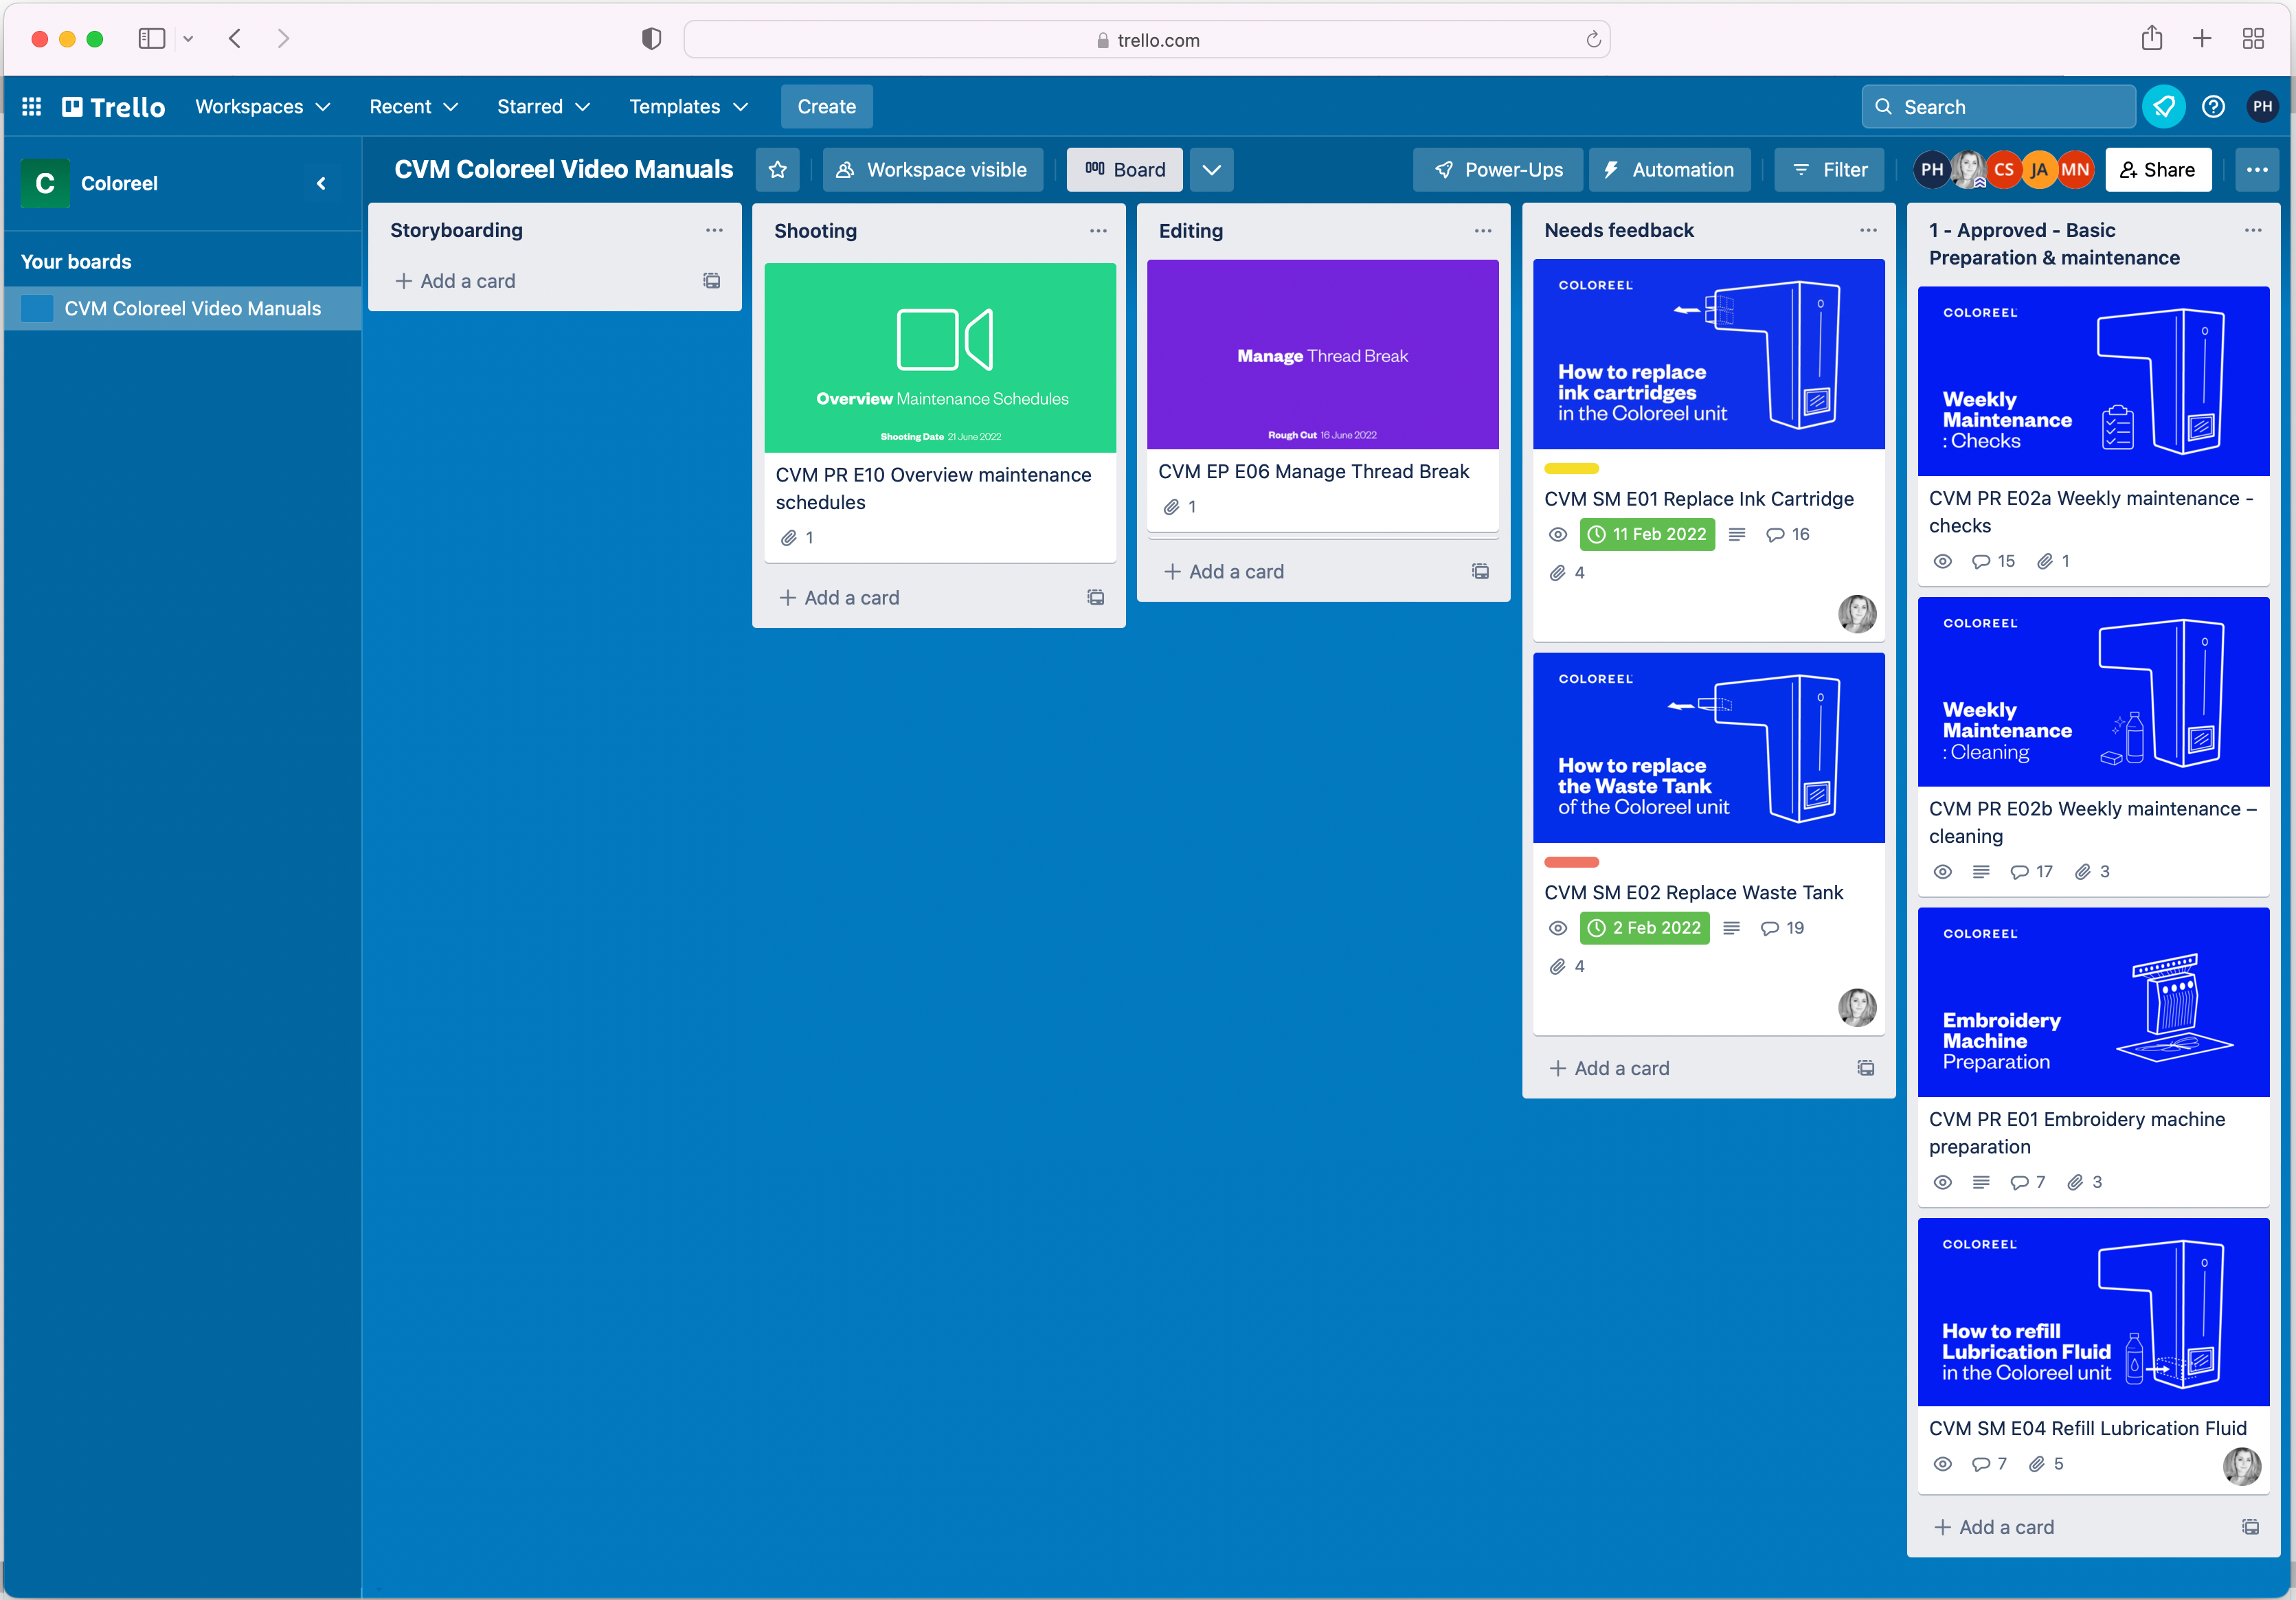 A screenshot of the Trello Project Management Tool